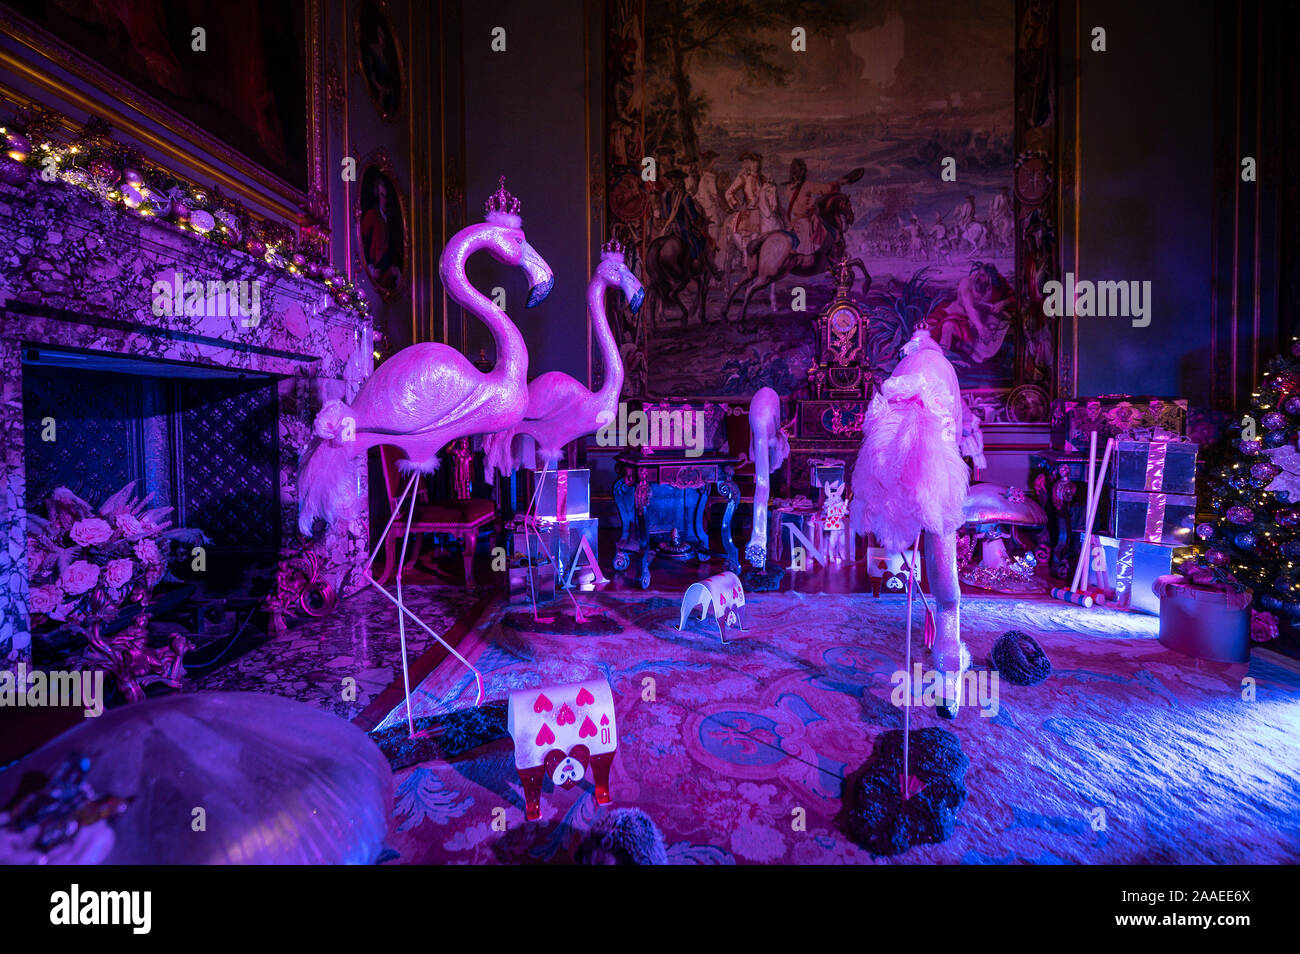 Blenheim Palace, Oxfordshire, UK. 21st Nov, 2019. Alice in Wonderland exhibition 'Alice in the Palace' at Blenheim Palace as part of their Christmas celebrations. Credit: Andrew Walmsley/Alamy Live News Stock Photo